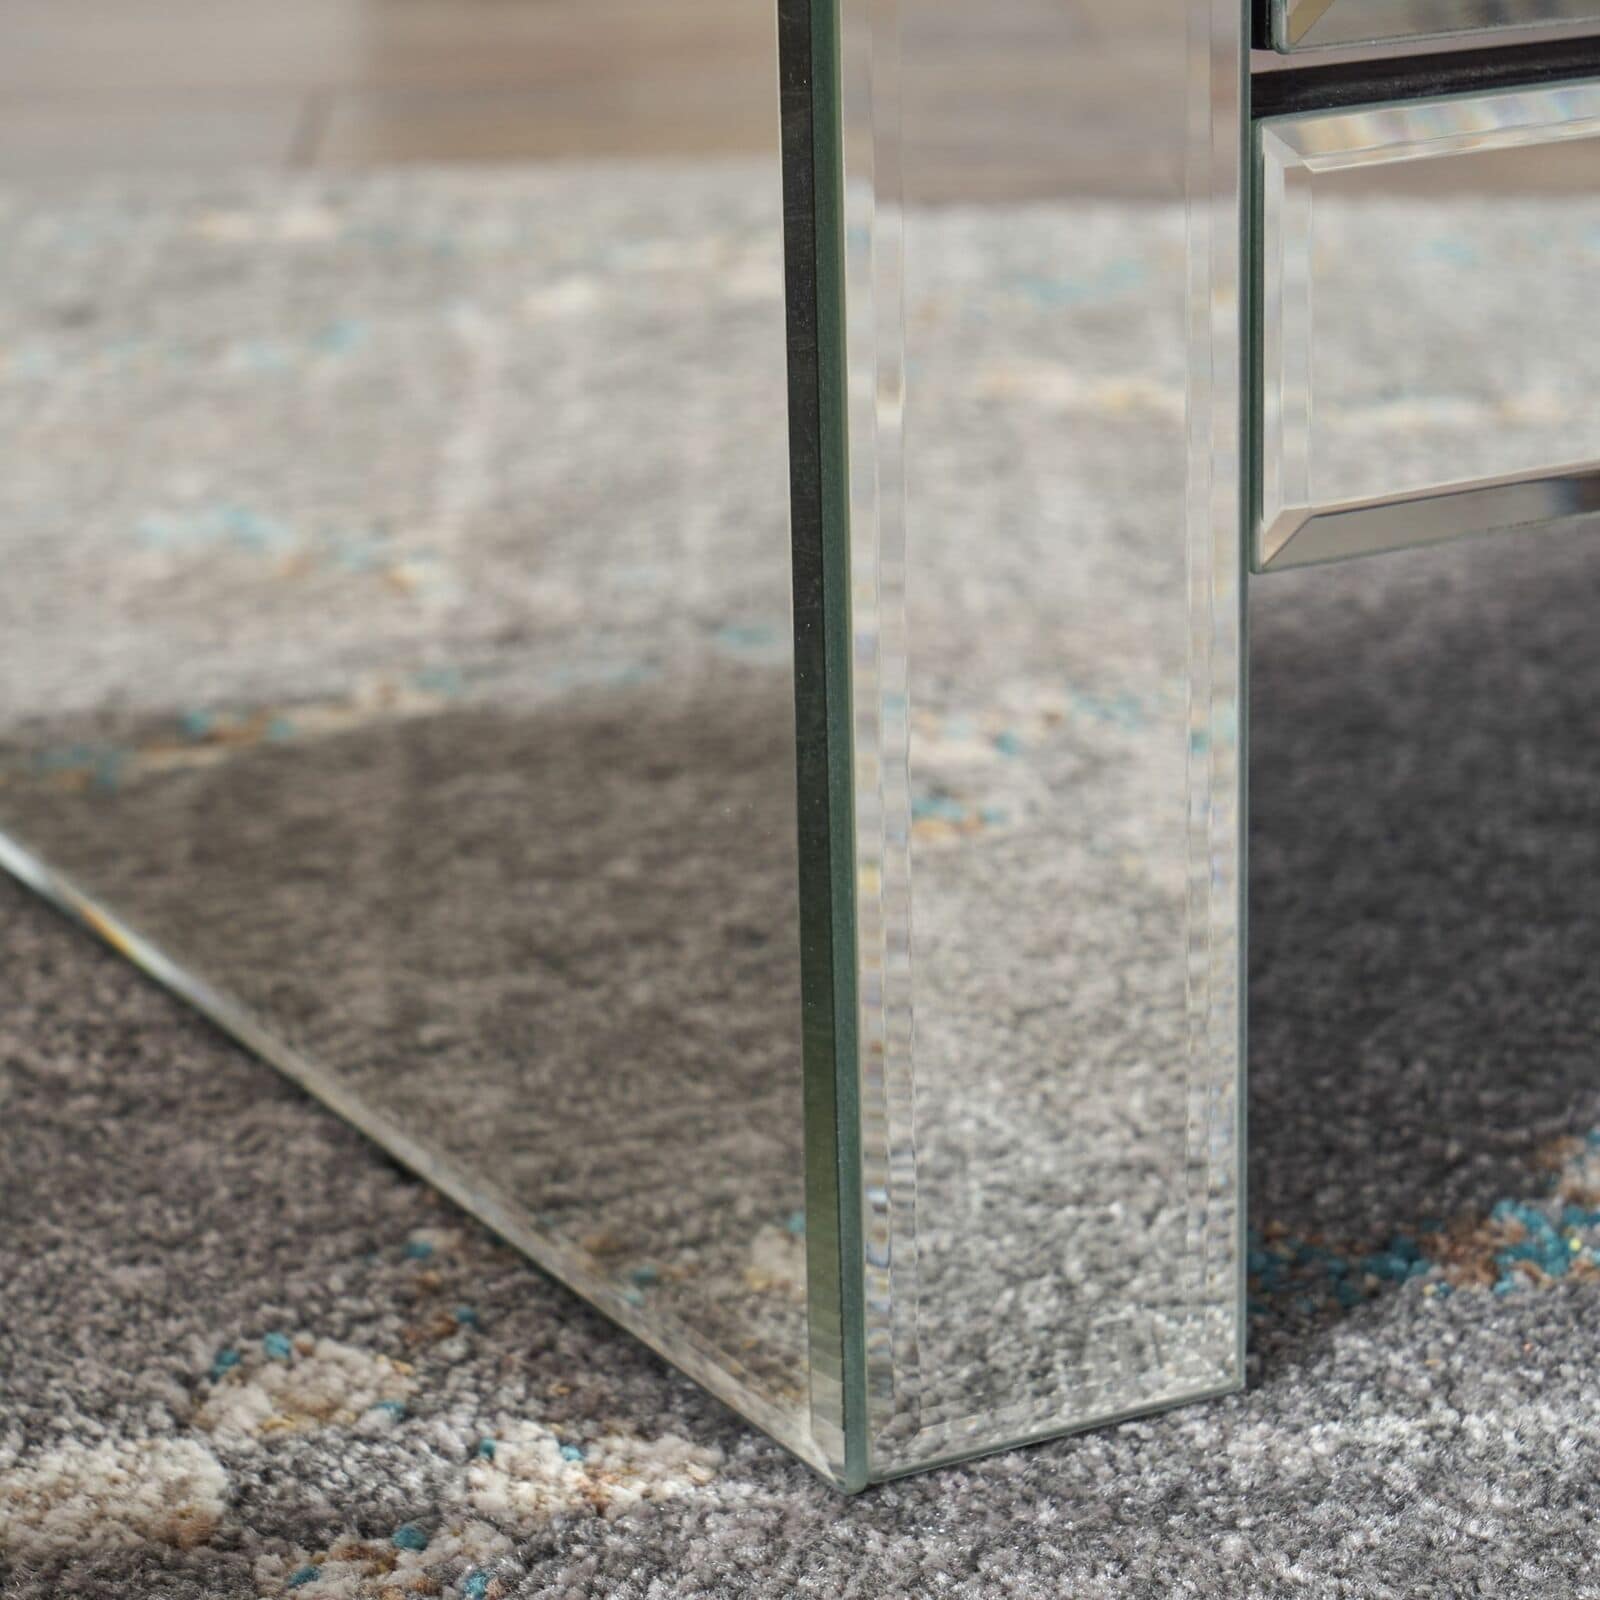 A glass coffee table with a mirror on top.